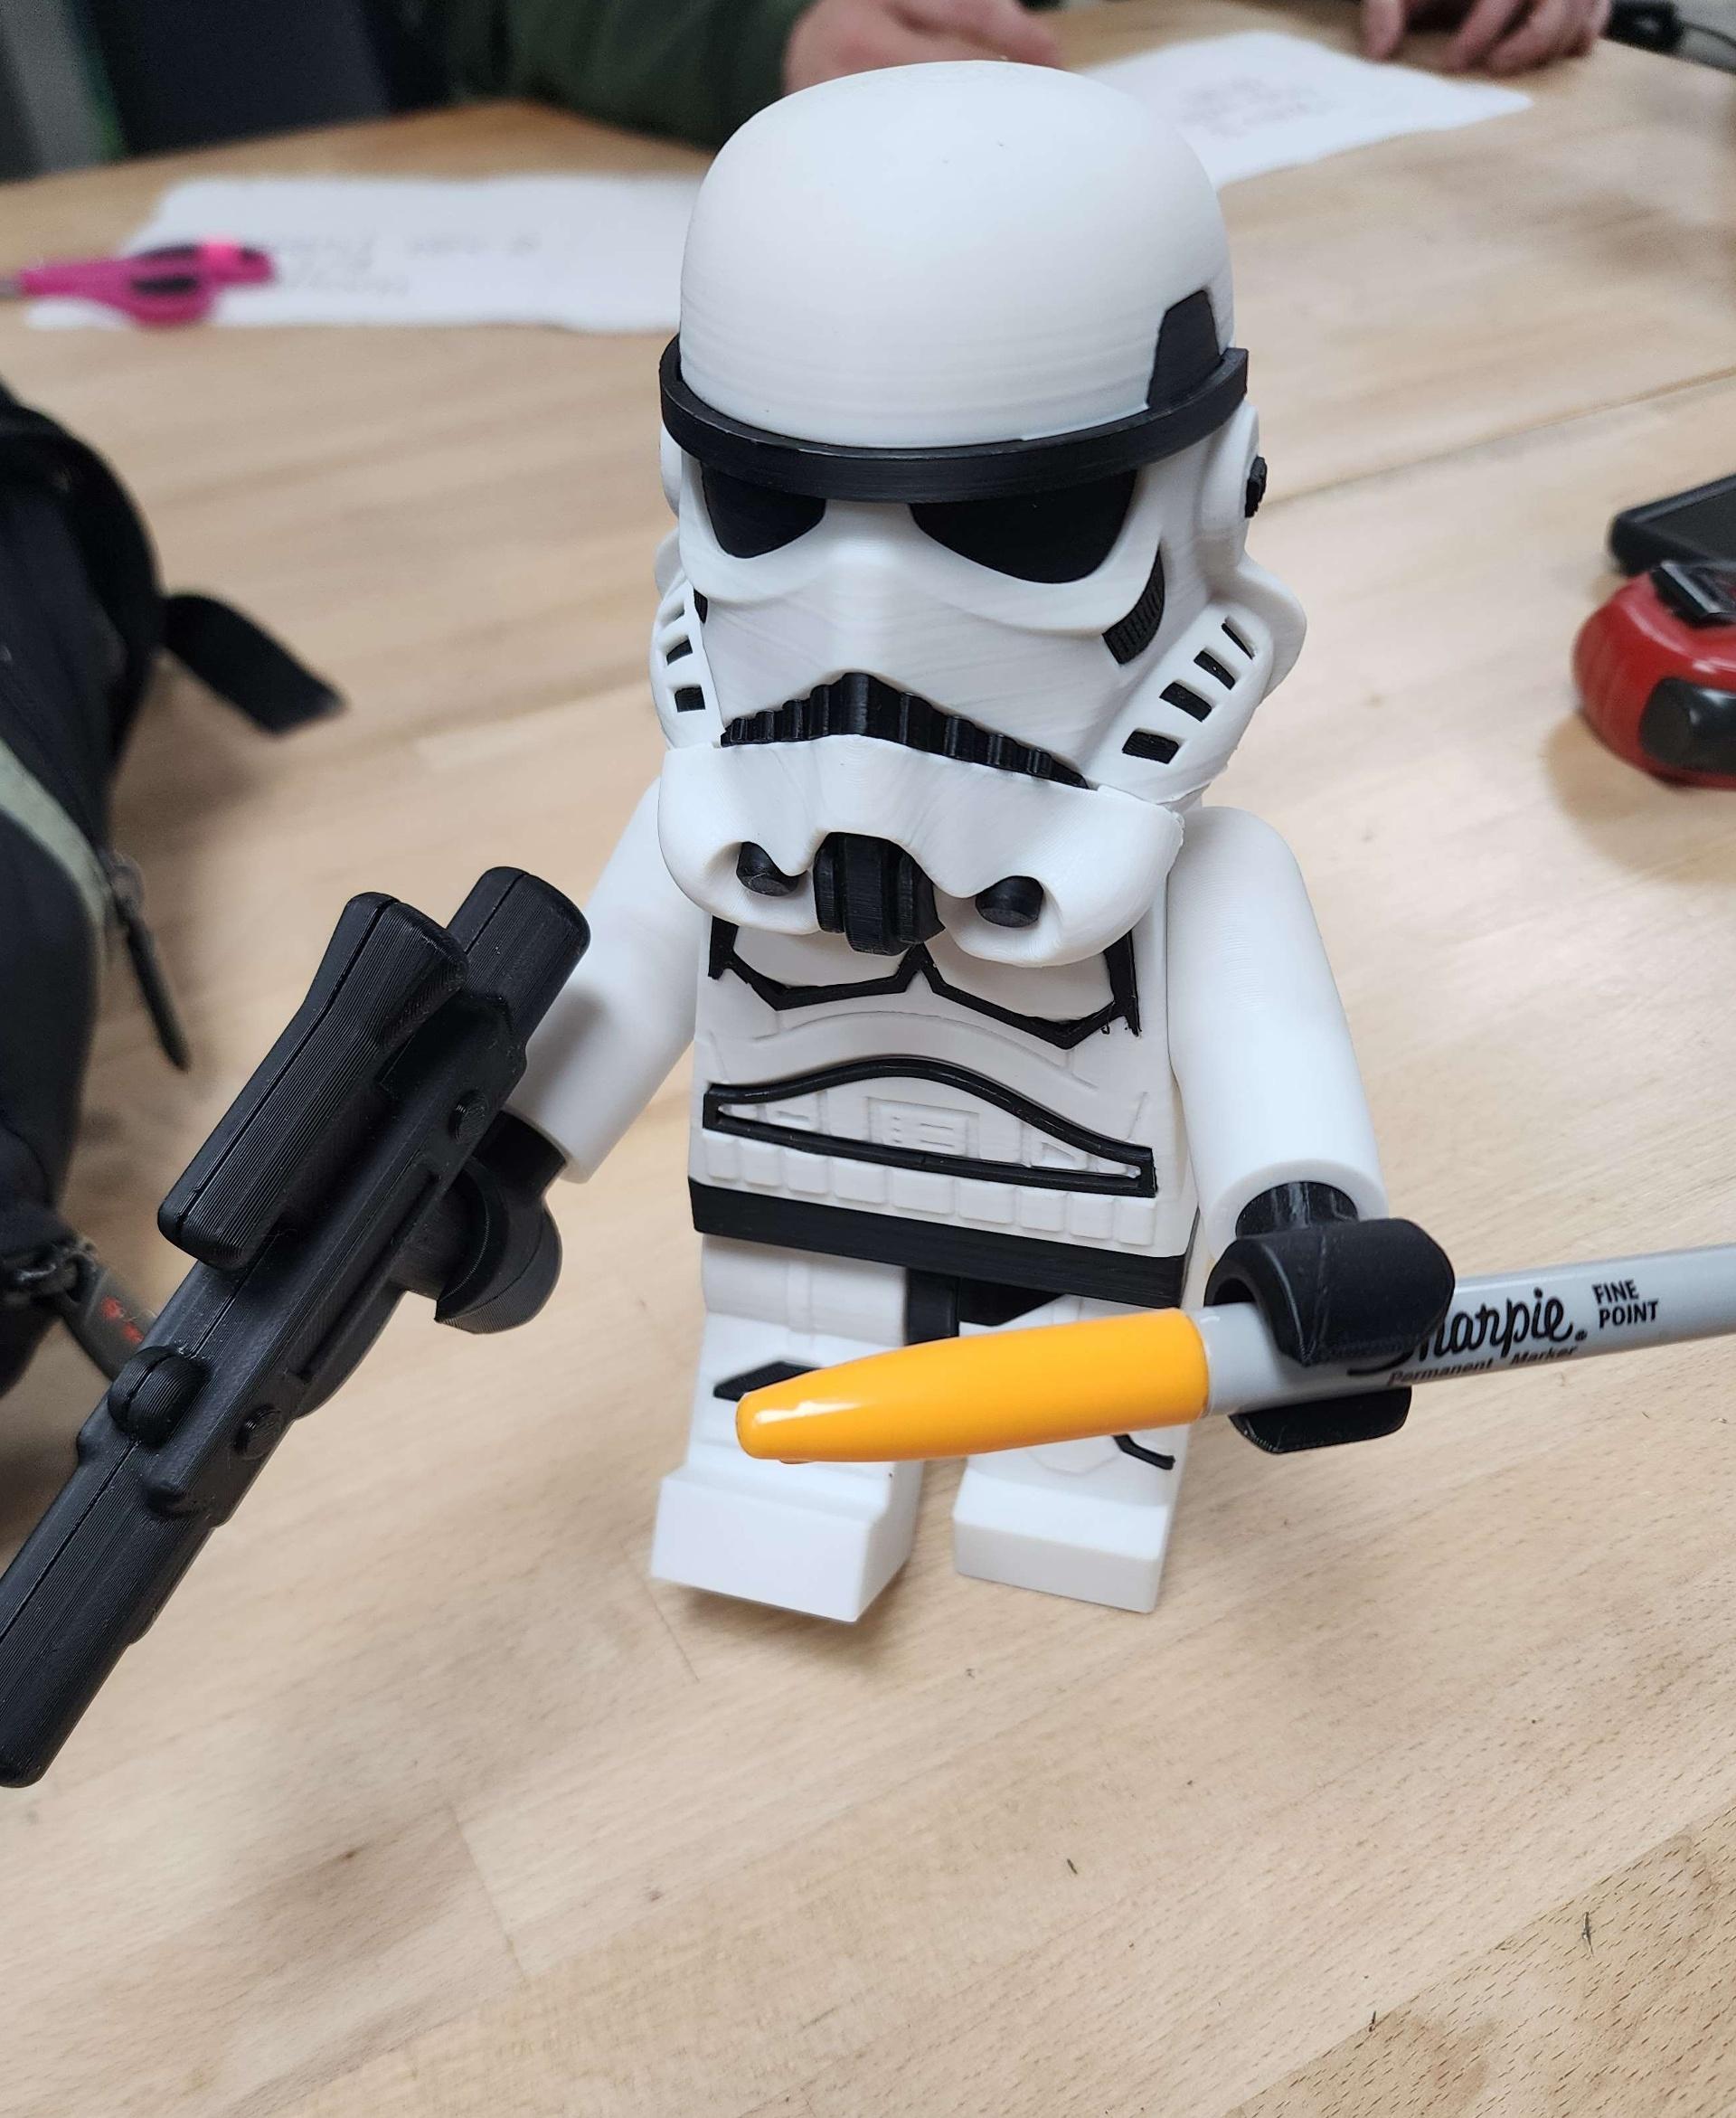 Stormtrooper (6:1 LEGO-inspired brick figure, NO MMU/AMS, NO supports, NO glue) - Can't wait for my next print from this designer. - 3d model